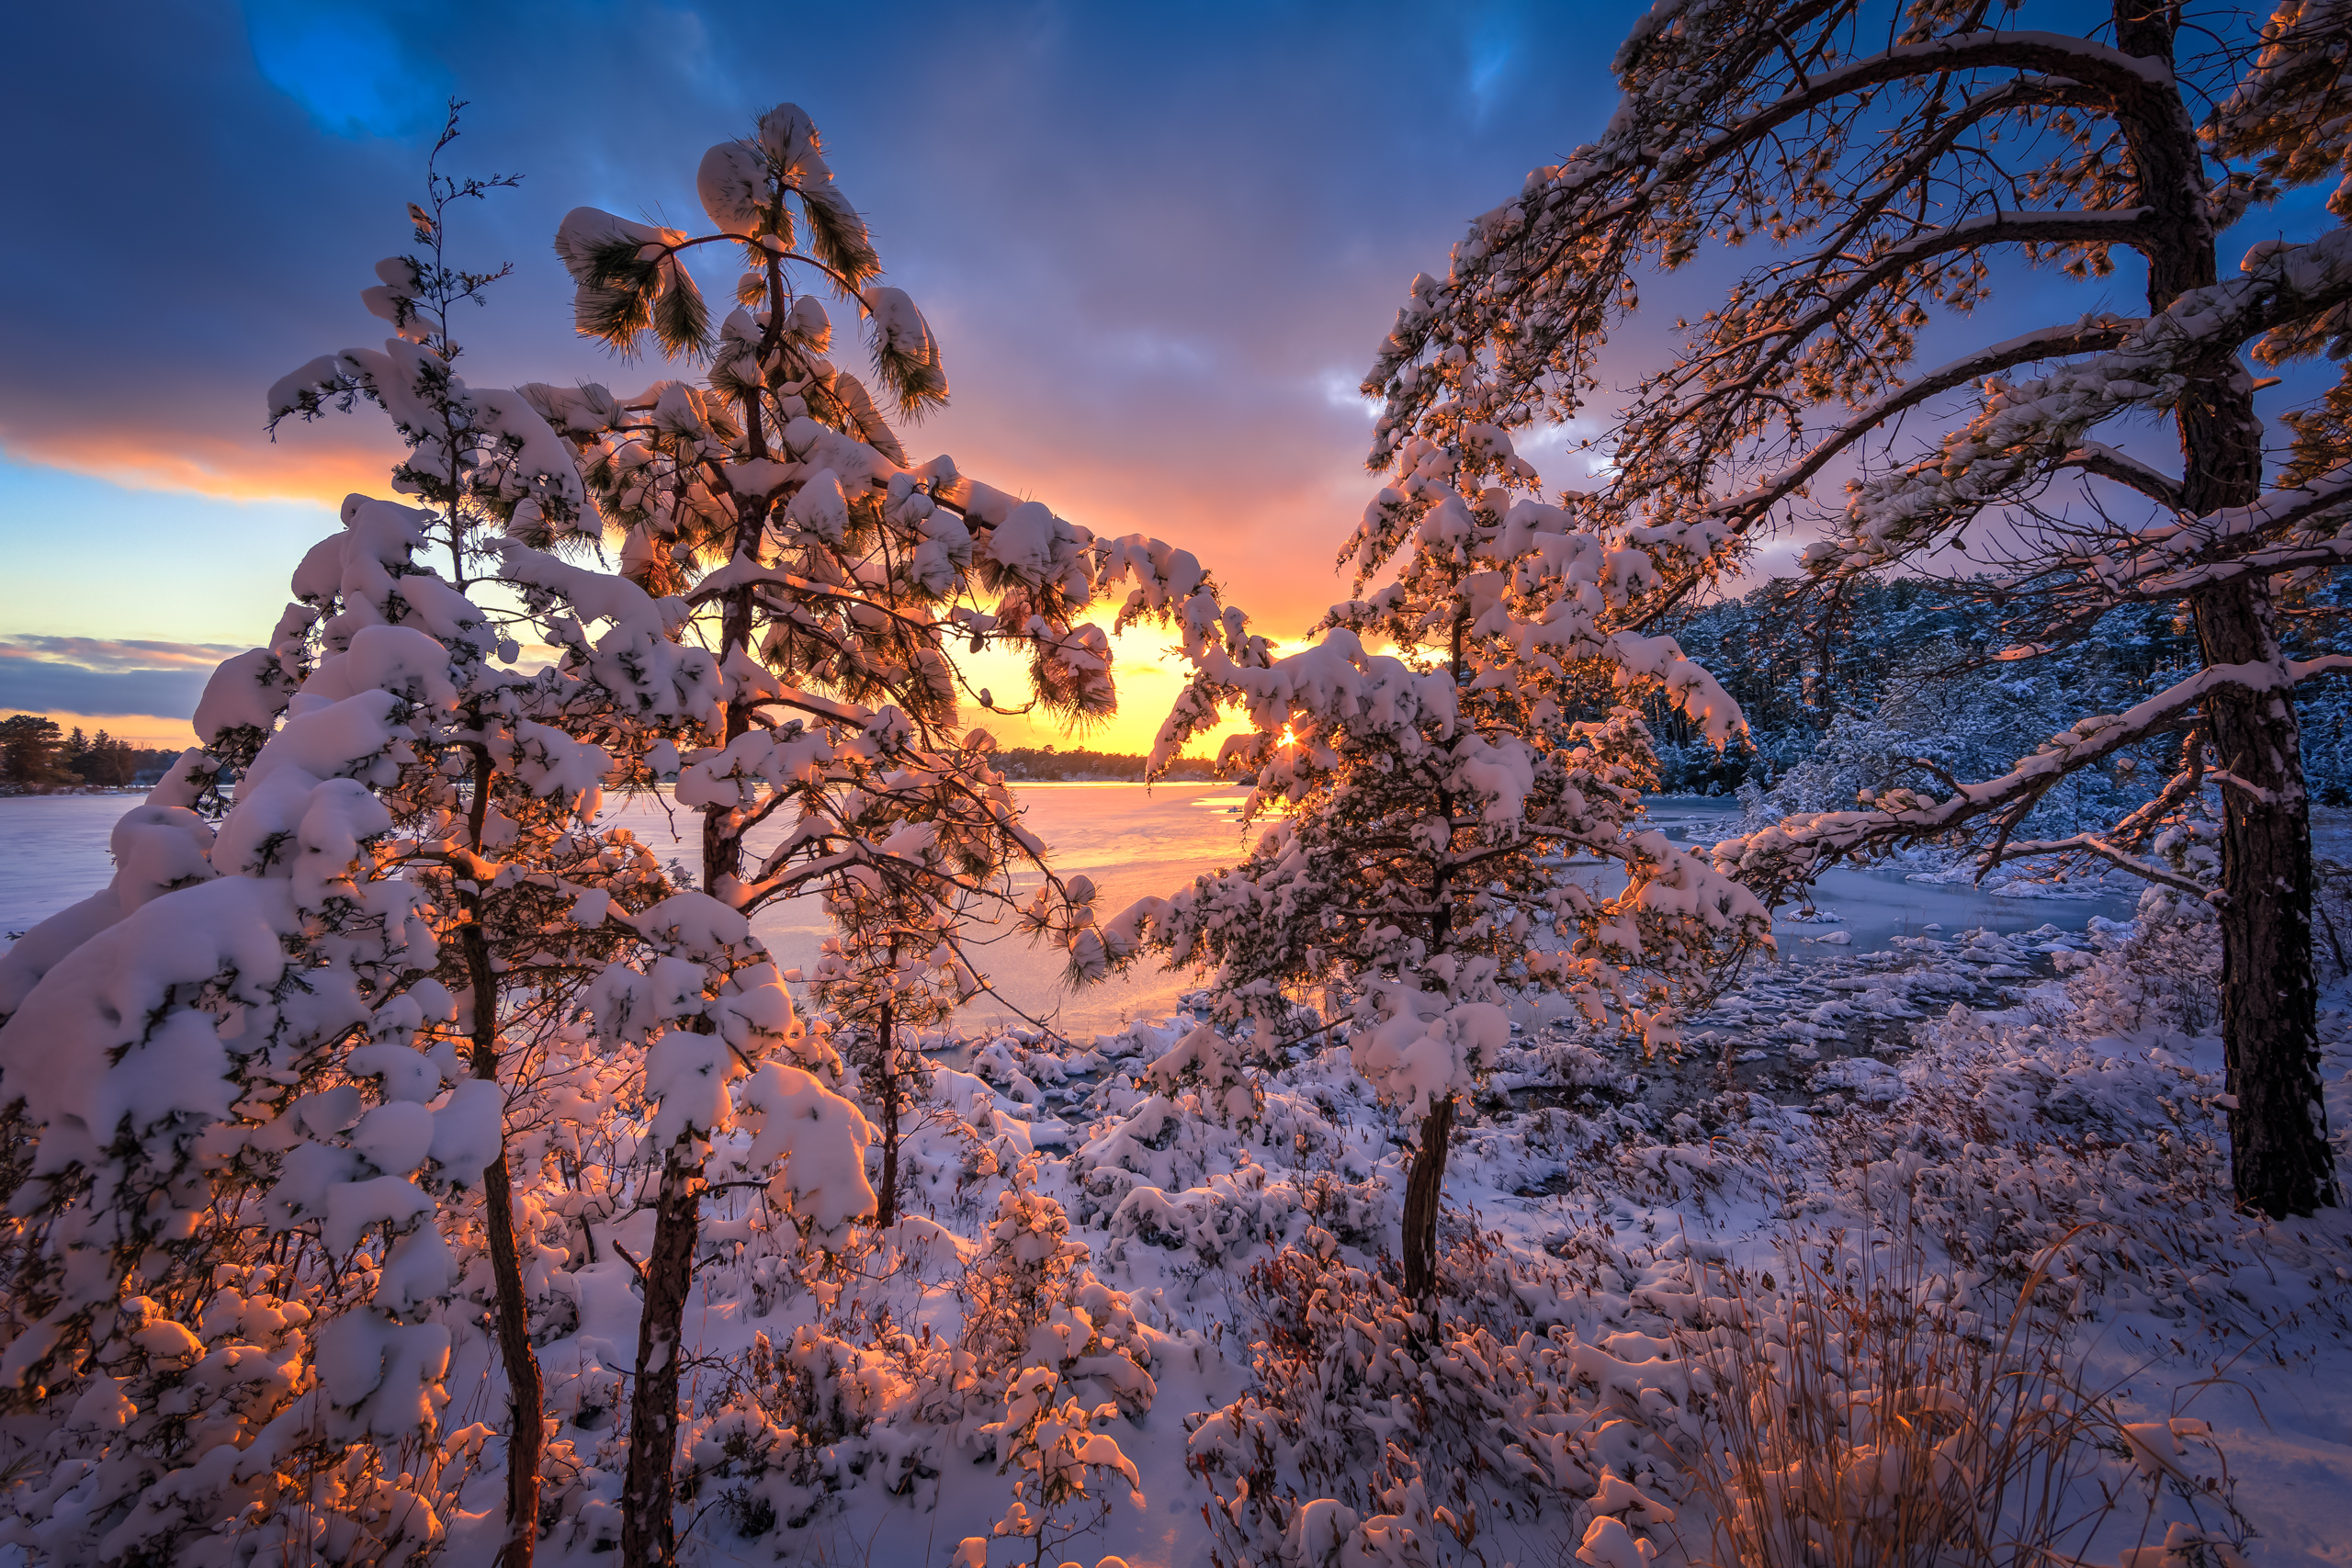 World class golden hour is magnified by the fresh fallen snow in this HDR photograph taken in the New Jersey Pinelands